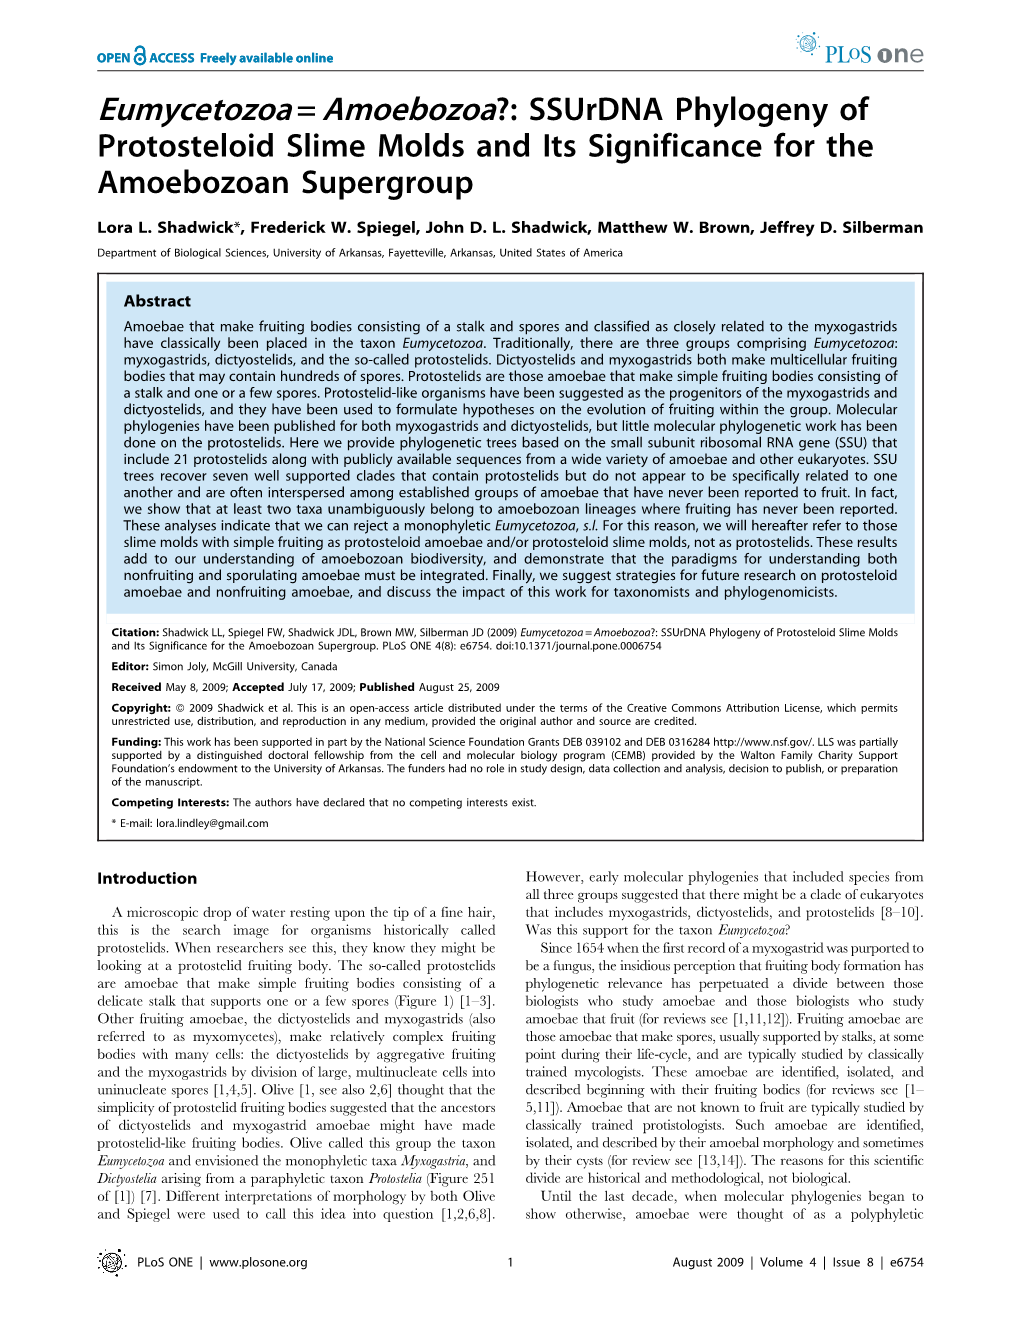 Ssurdna Phylogeny of Protosteloid Slime Molds and Its Significance for the Amoebozoan Supergroup